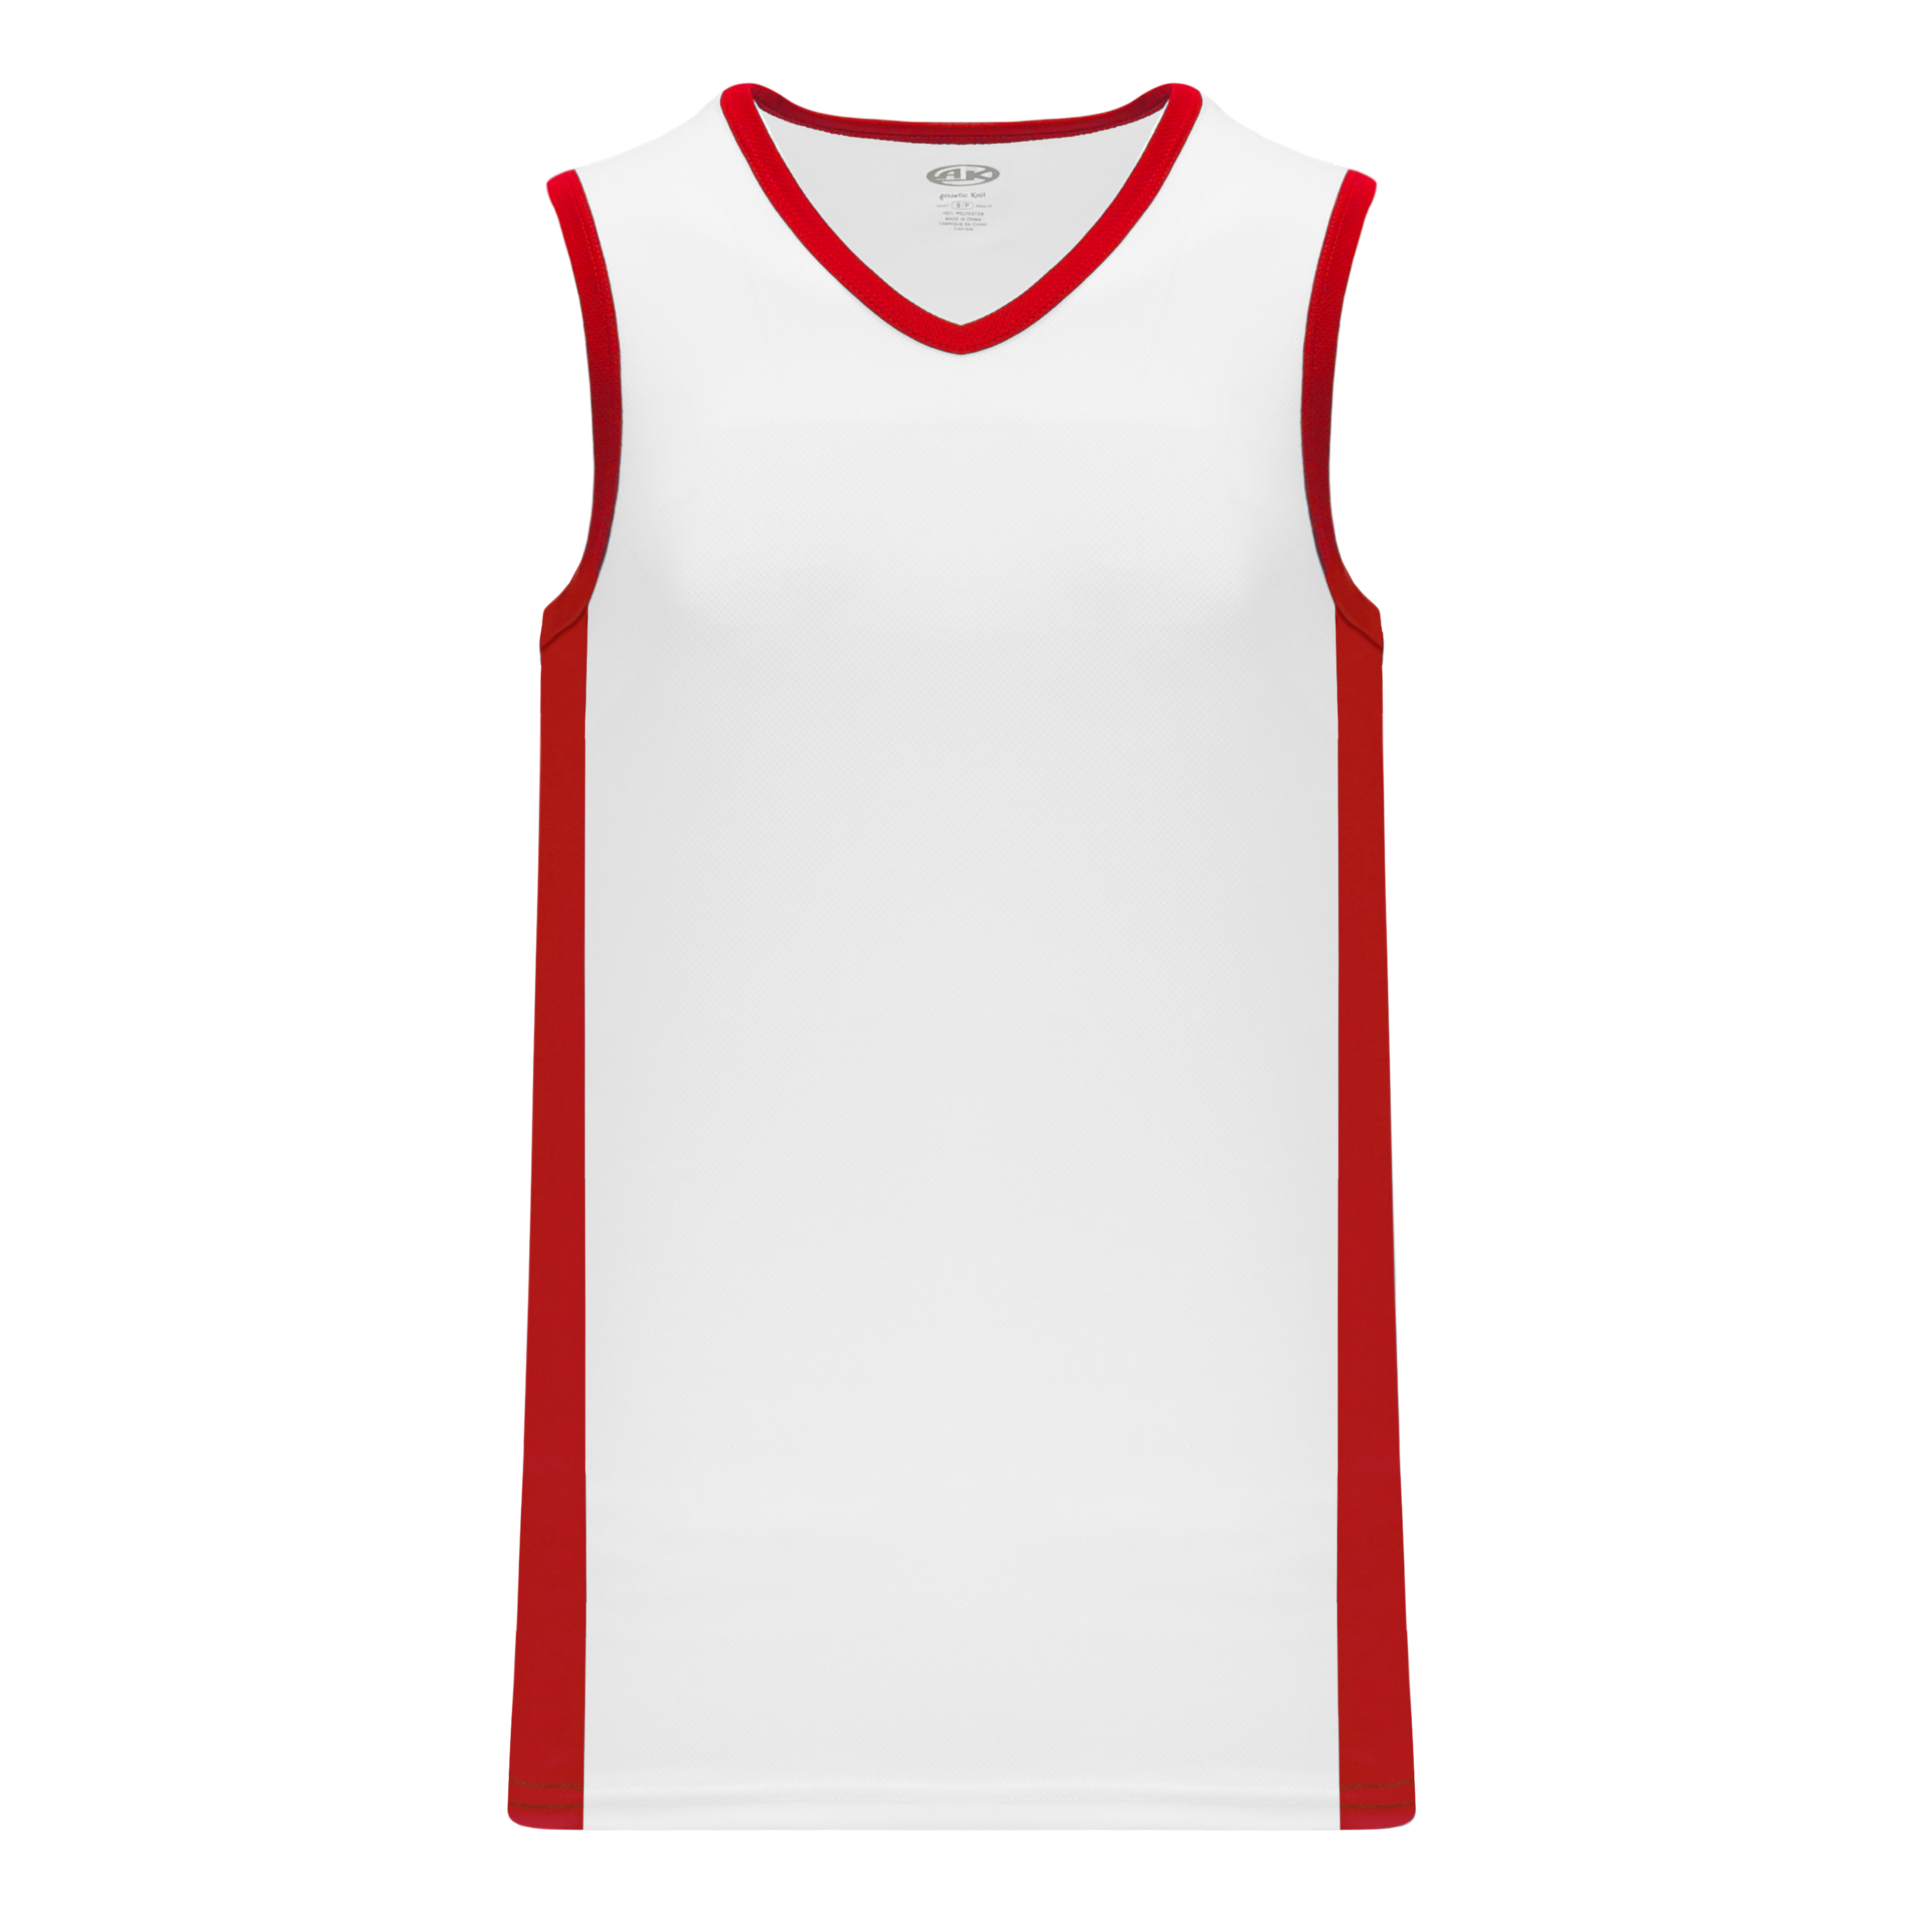 Muscle Basketball Jersey, Youth Medium, Royal with White Highlights 